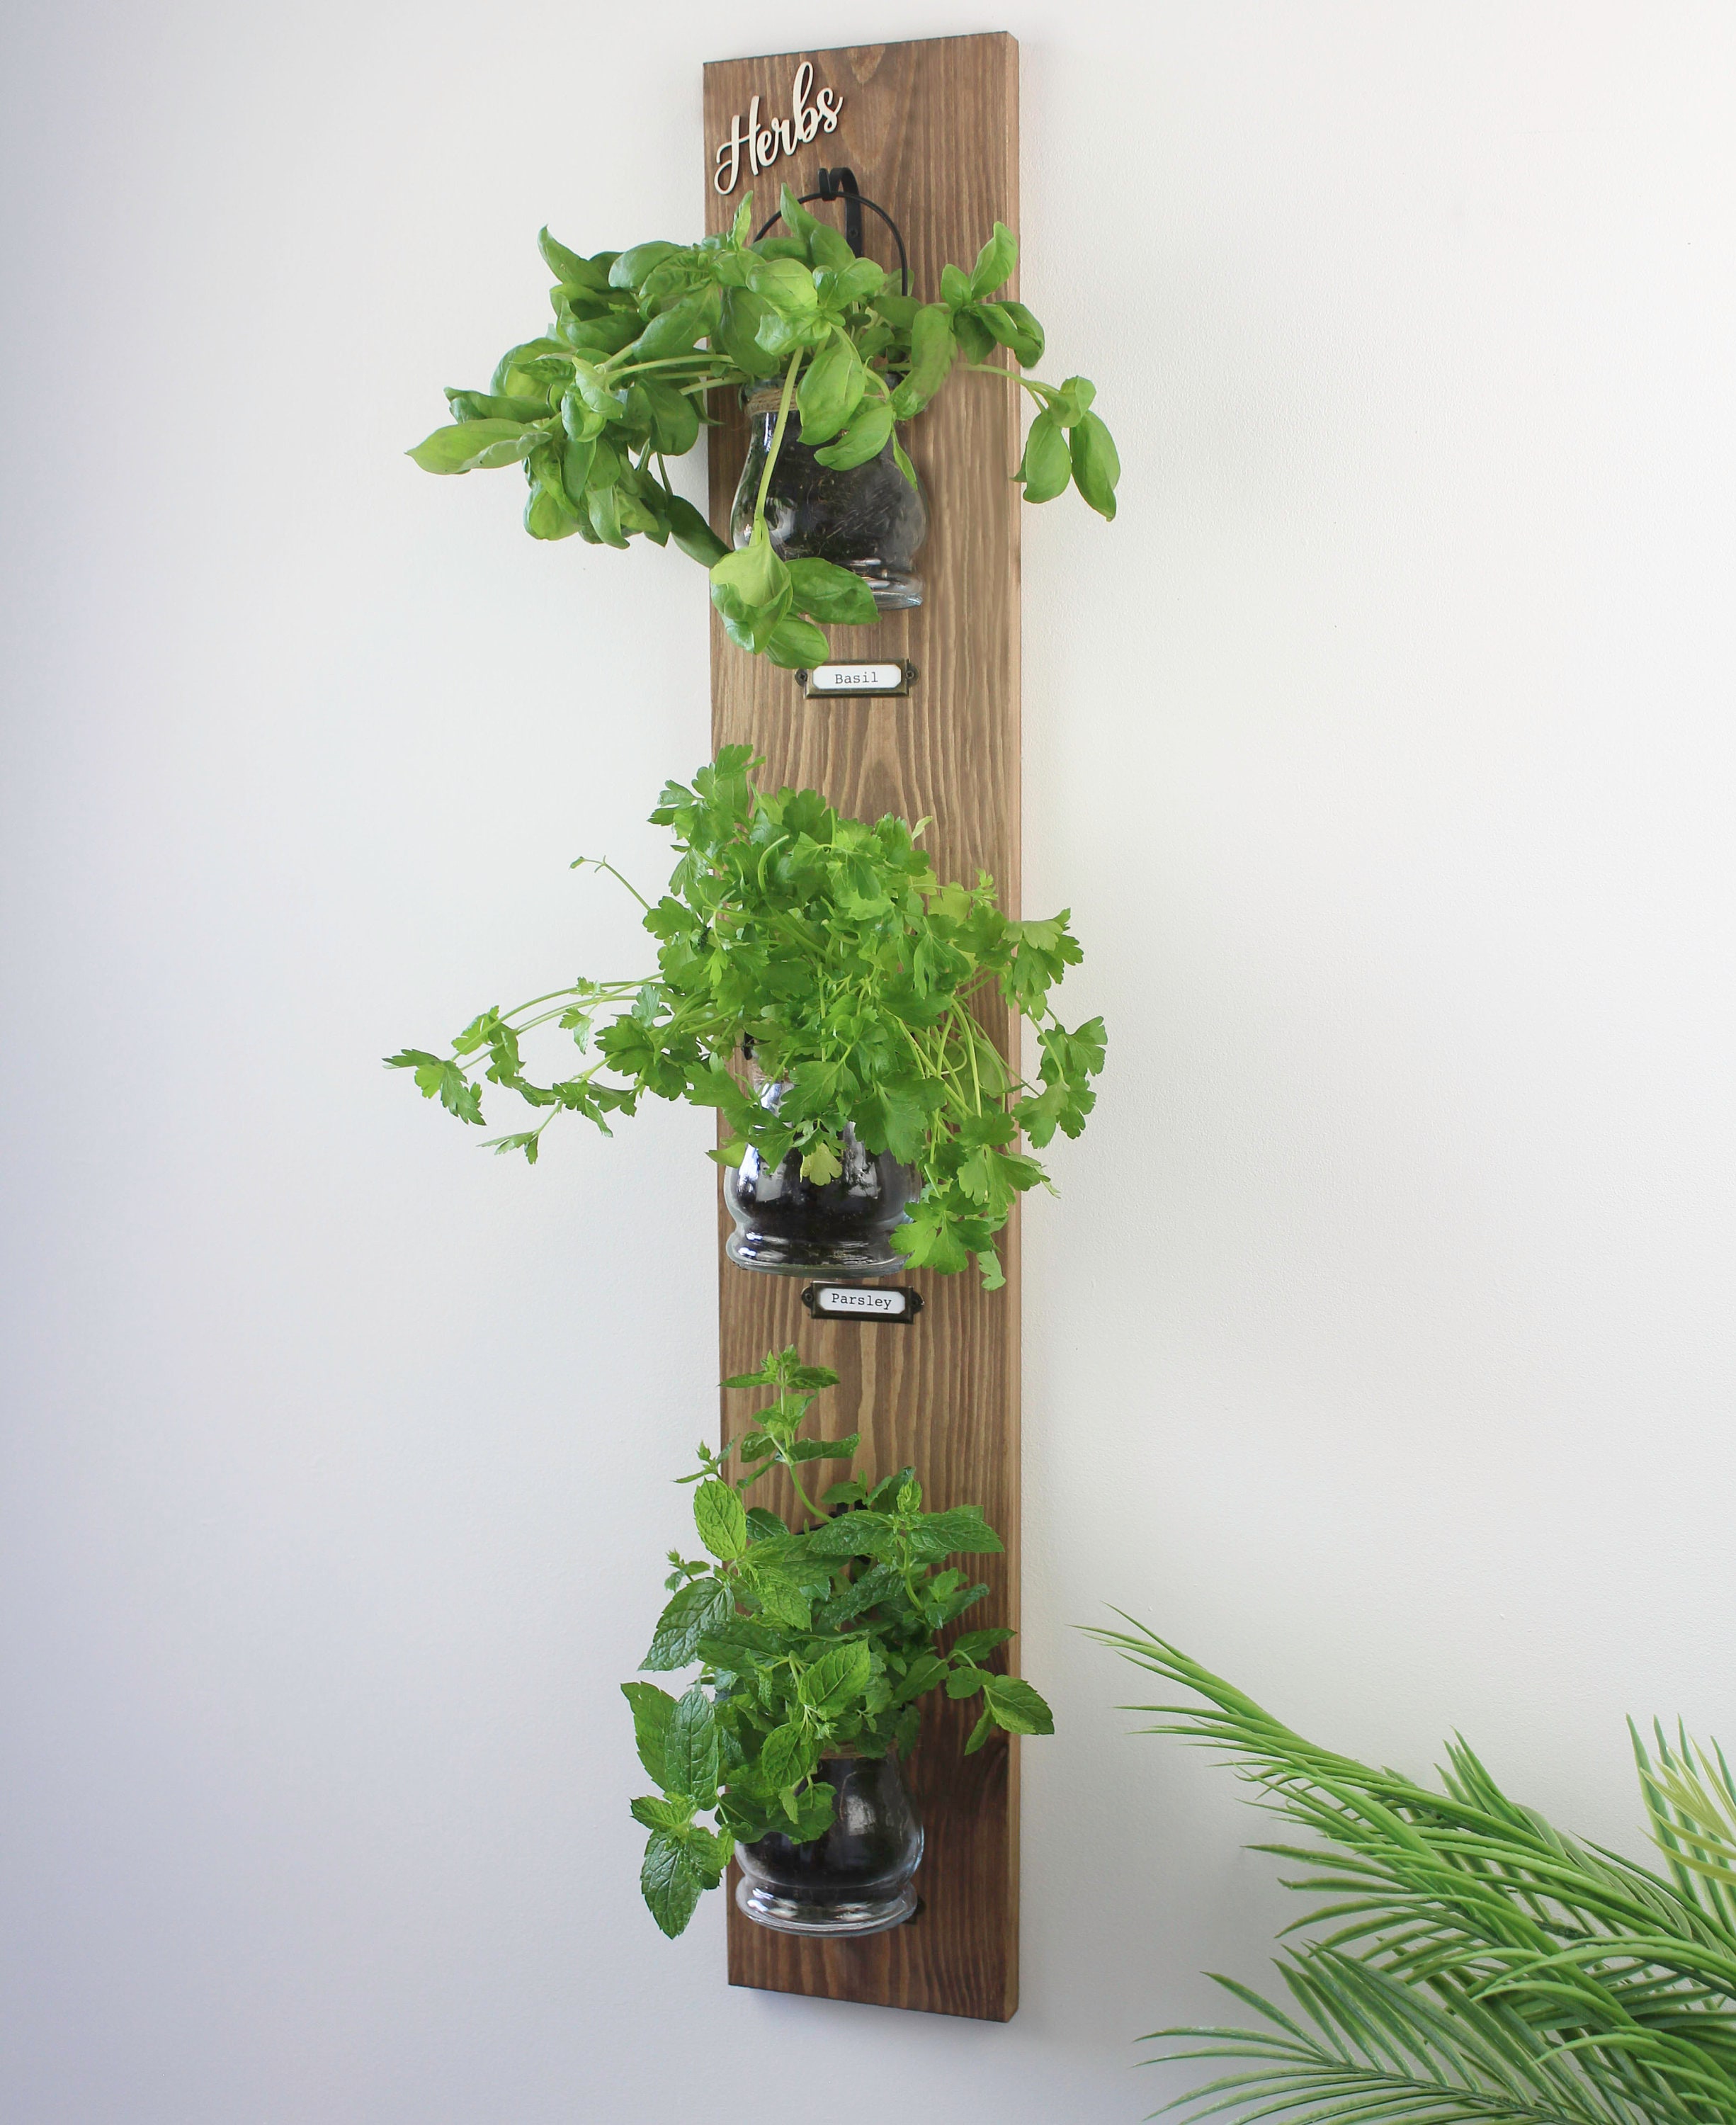 DIY Stacked Herb Garden - Growing Herbs at Home